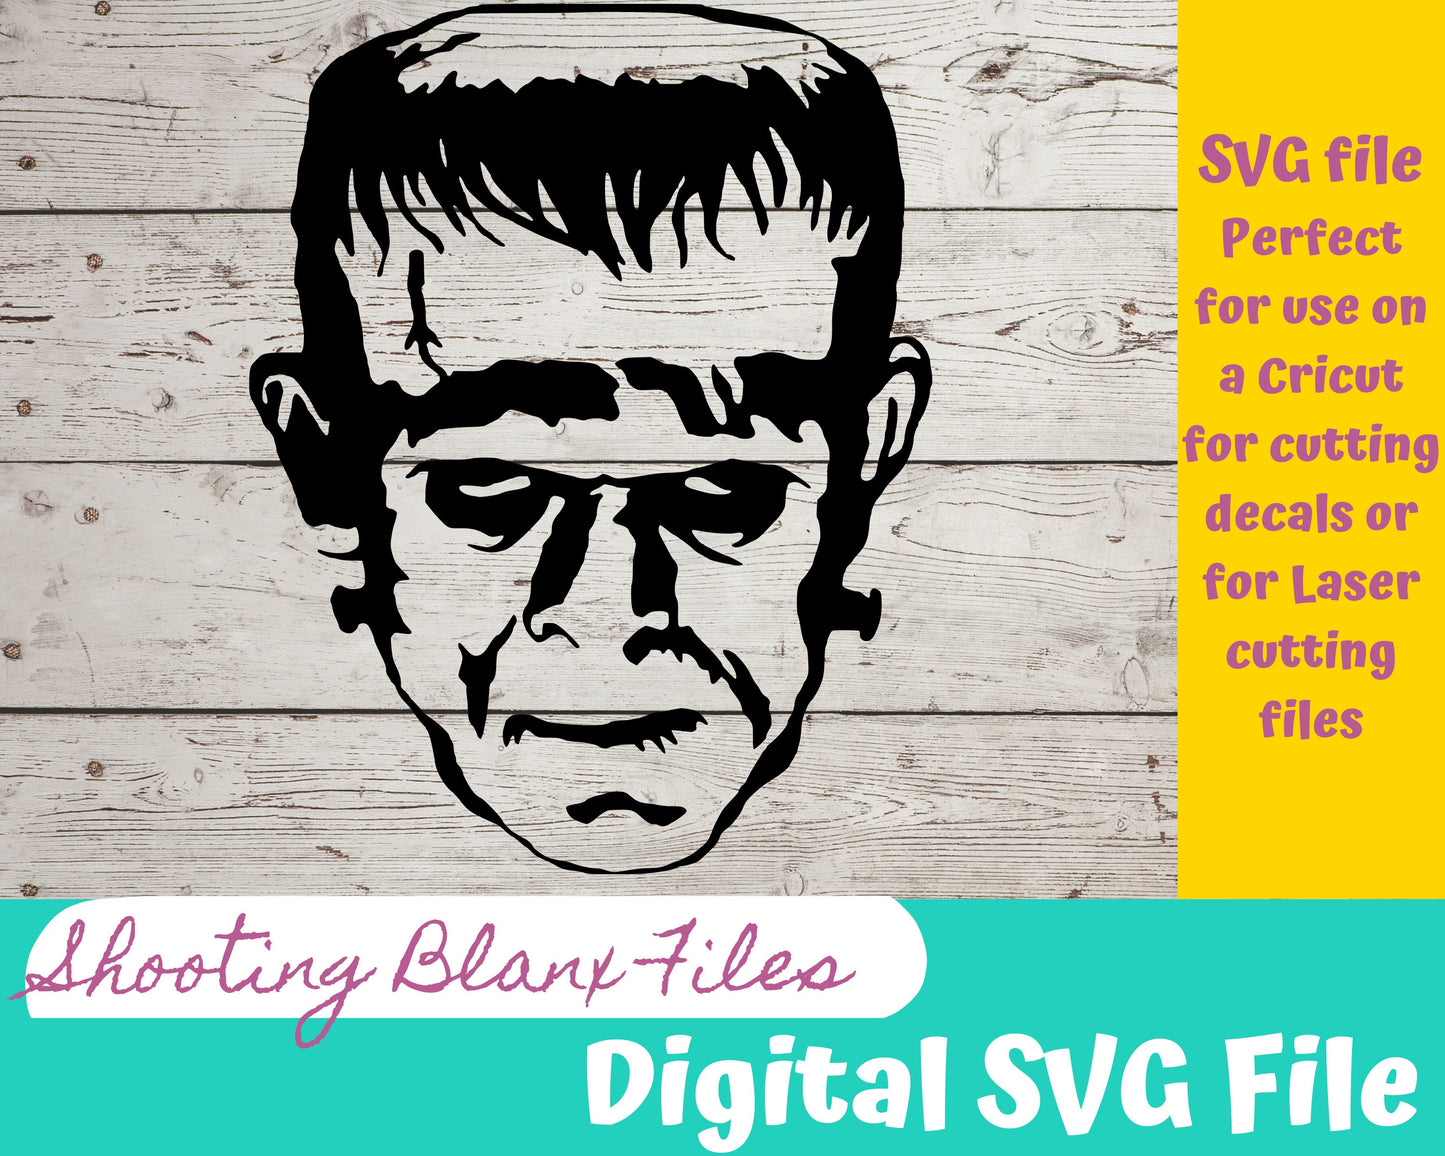 Classic Horror SVG files perfect for Cricut, also for laser cutting Glowforge , Frankenstein, Wolfman, swamp thing